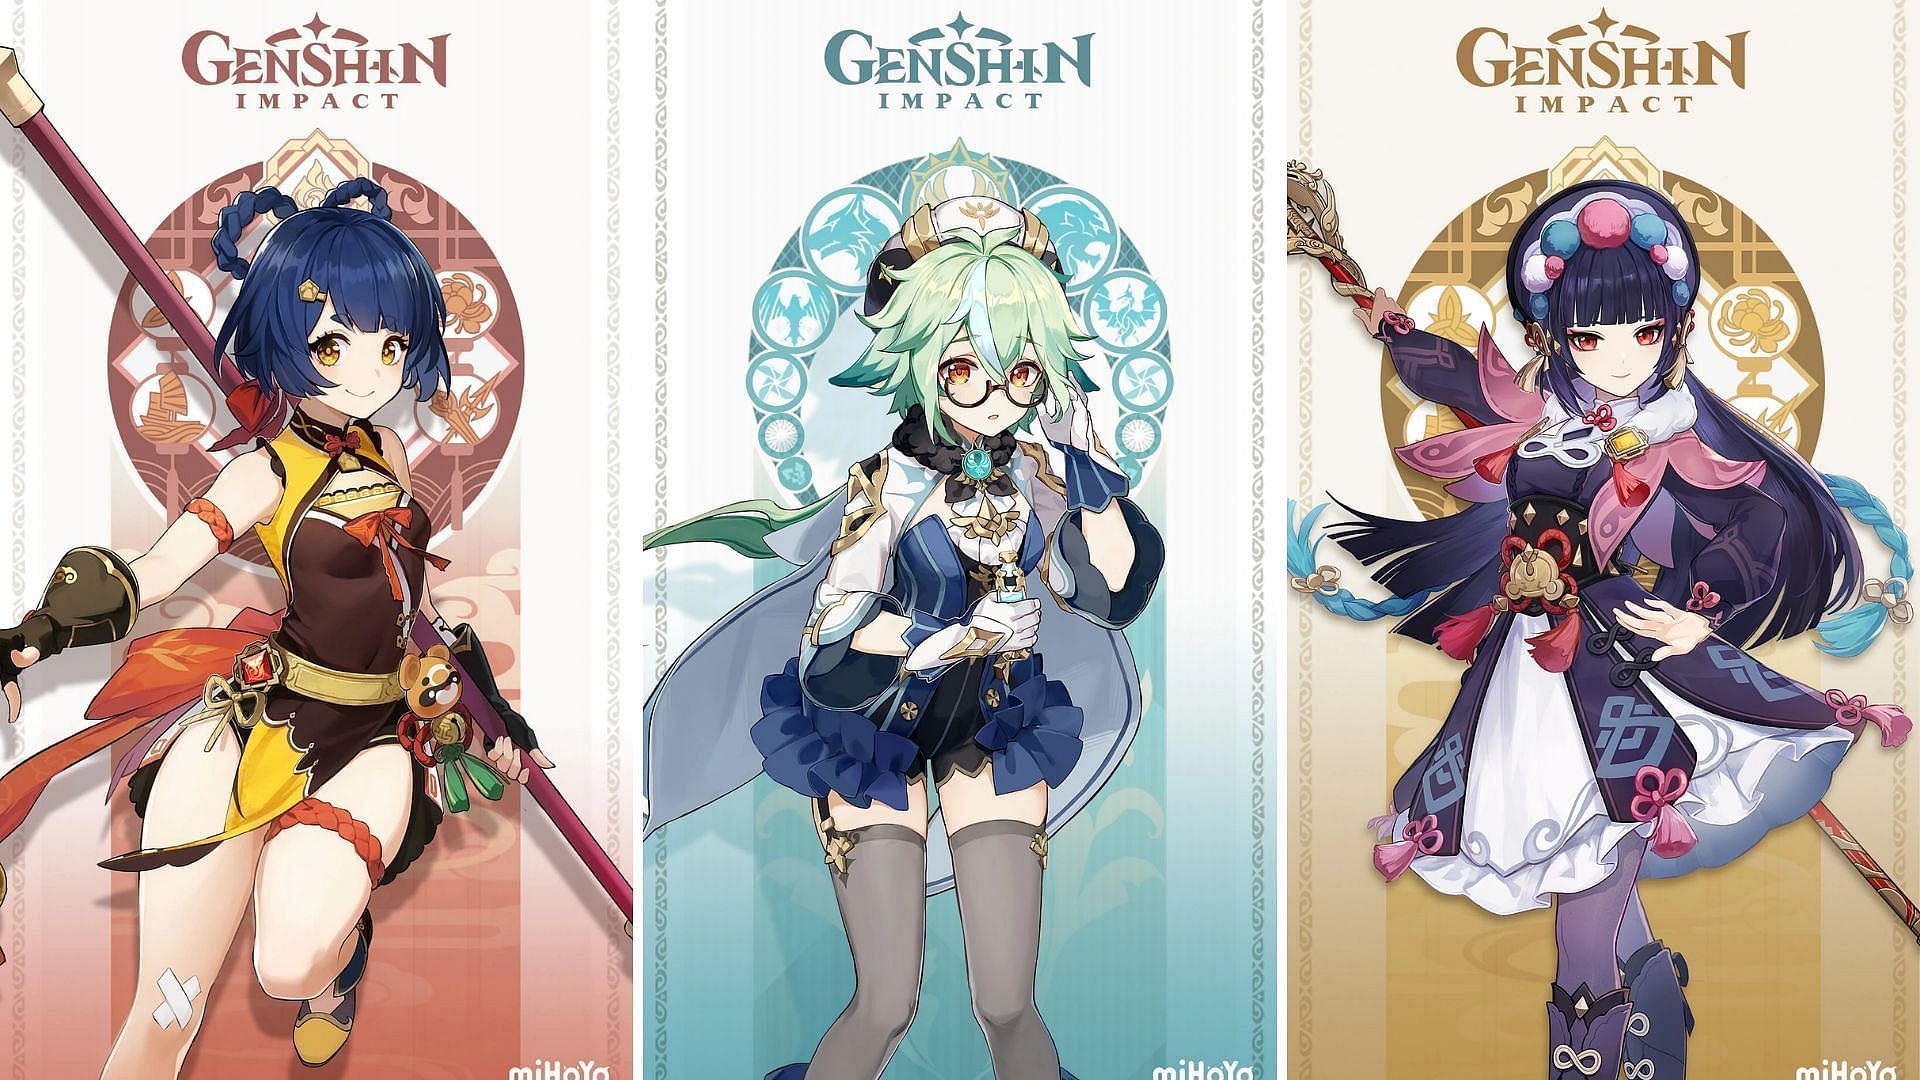 Xiangling, Sucrose, and Yunjin will appear on phase-1 banners (Image via HoYoverse)